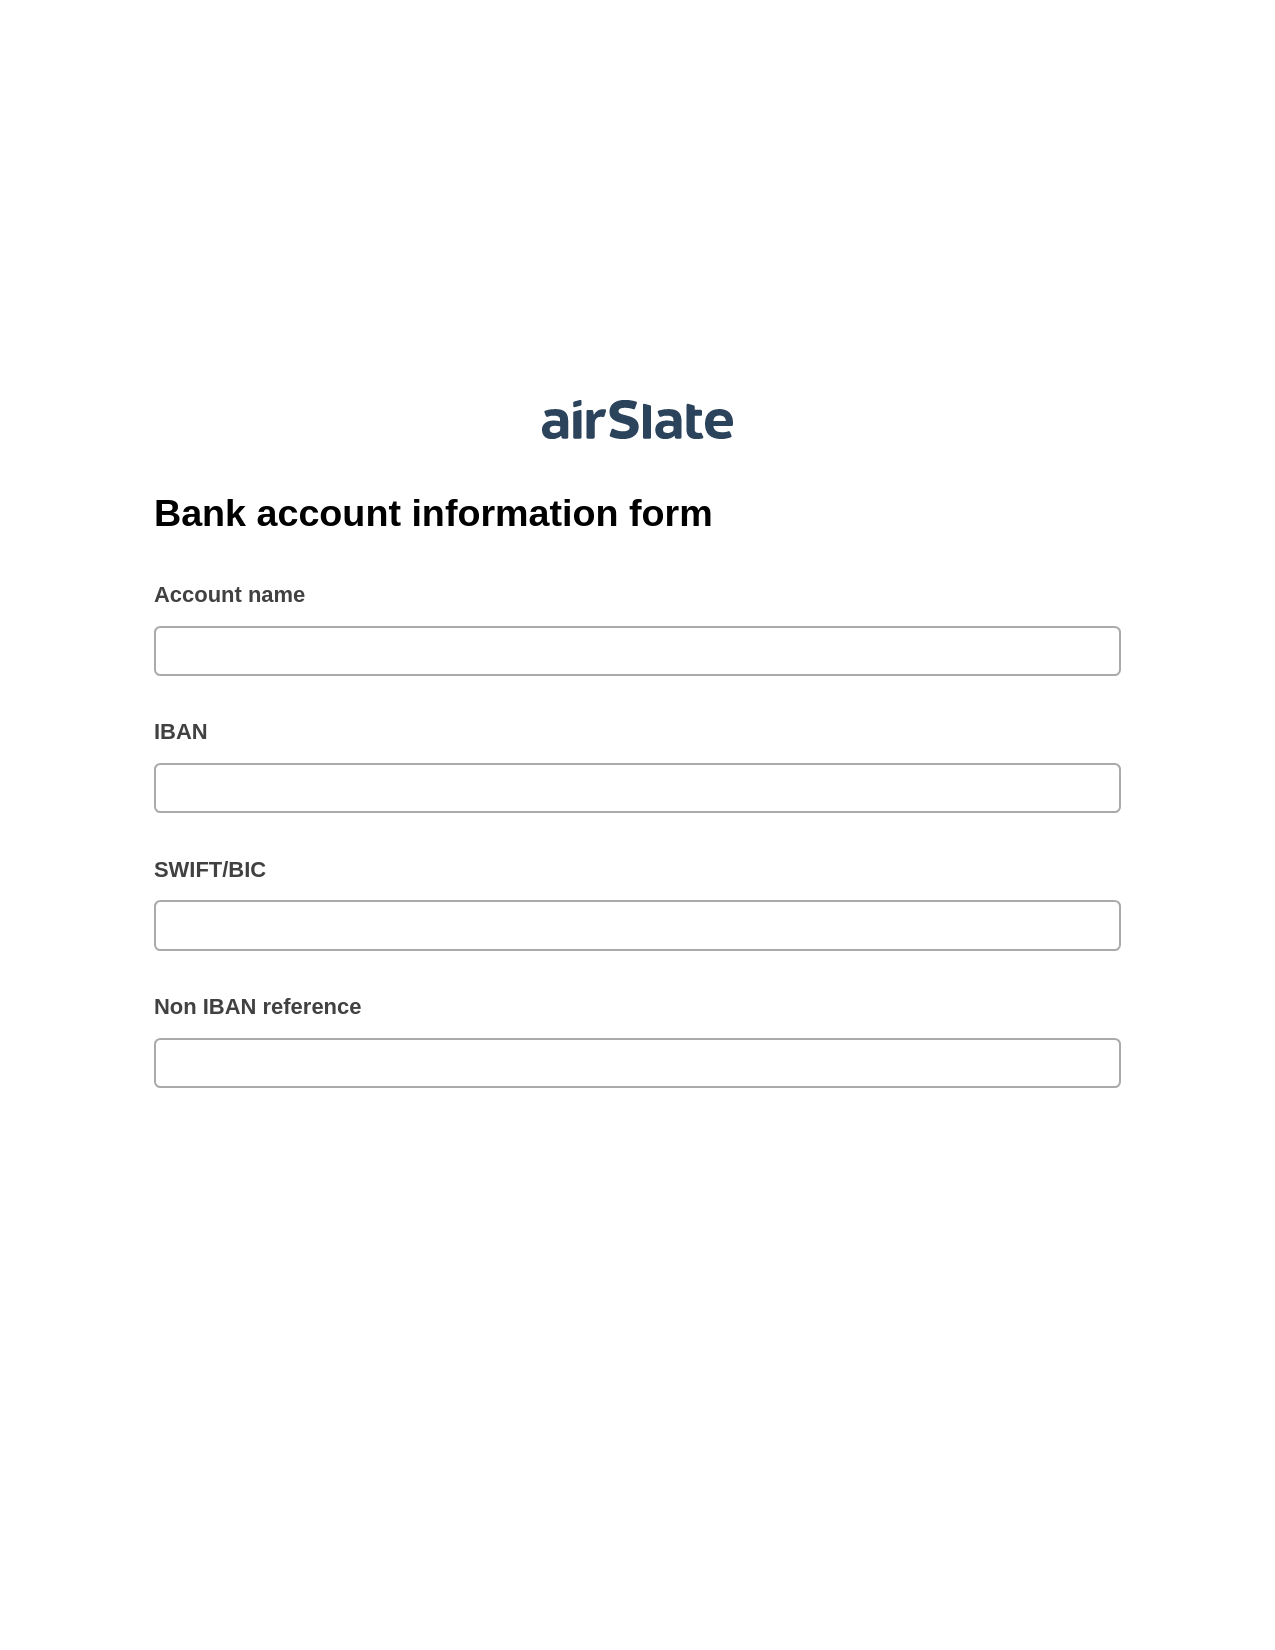 Multirole Bank account information form Pre-fill from CSV File Bot, Export to MS Dynamics 365 Bot, Export to Excel 365 Bot